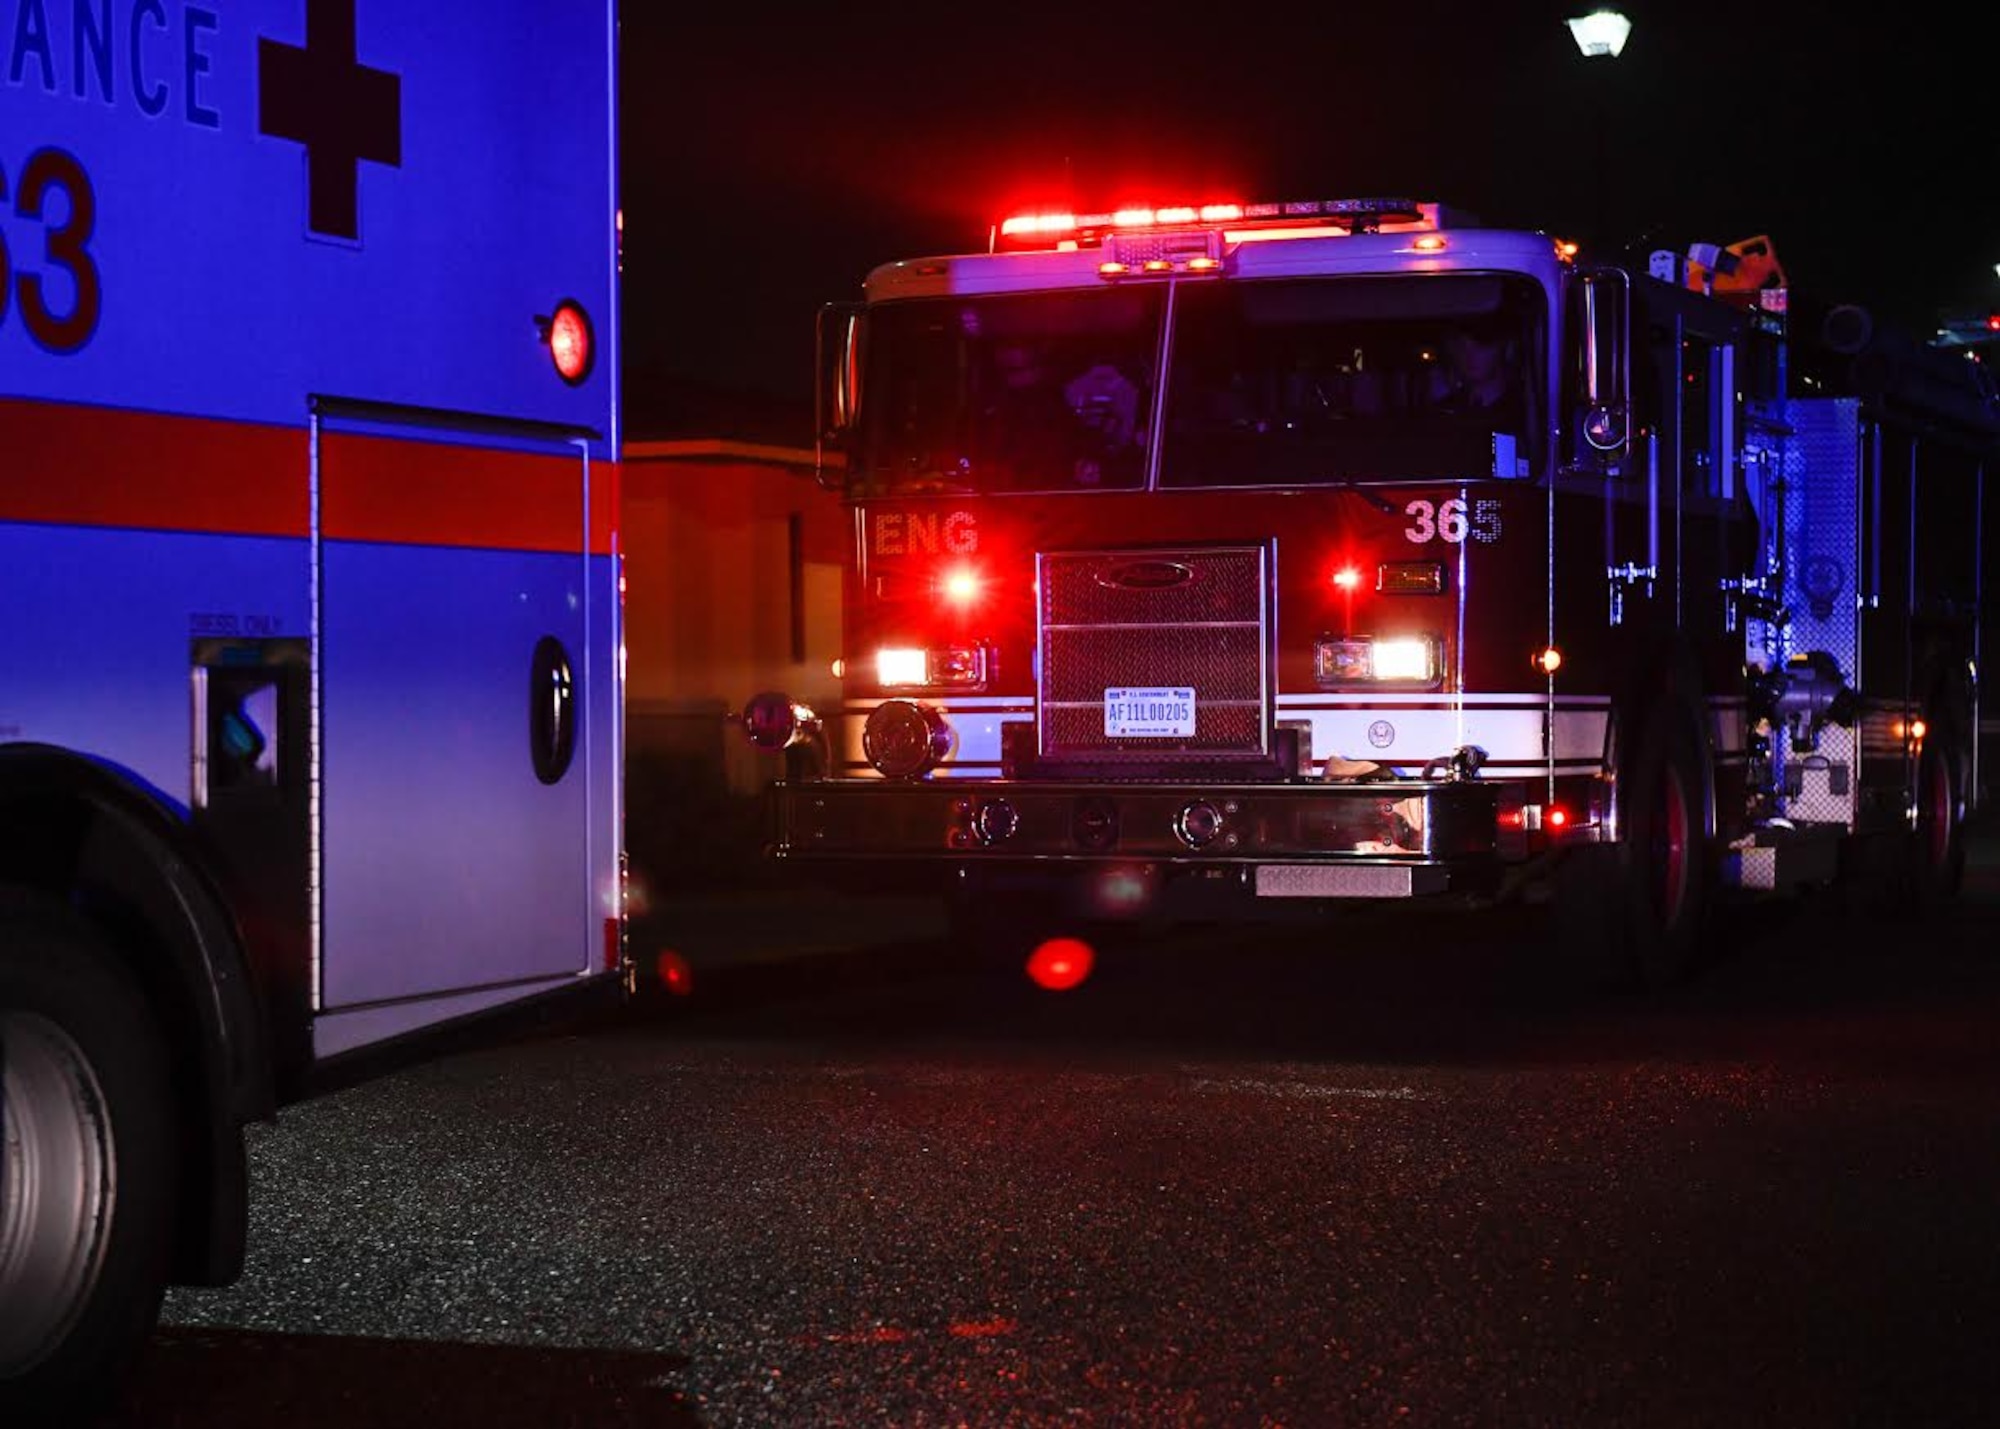 Luke Air Force Base firefighters arrive at an on-base medical emergency in the early hours of the morning Dec. 9, 2019, at Luke Air Force Base, Ariz.